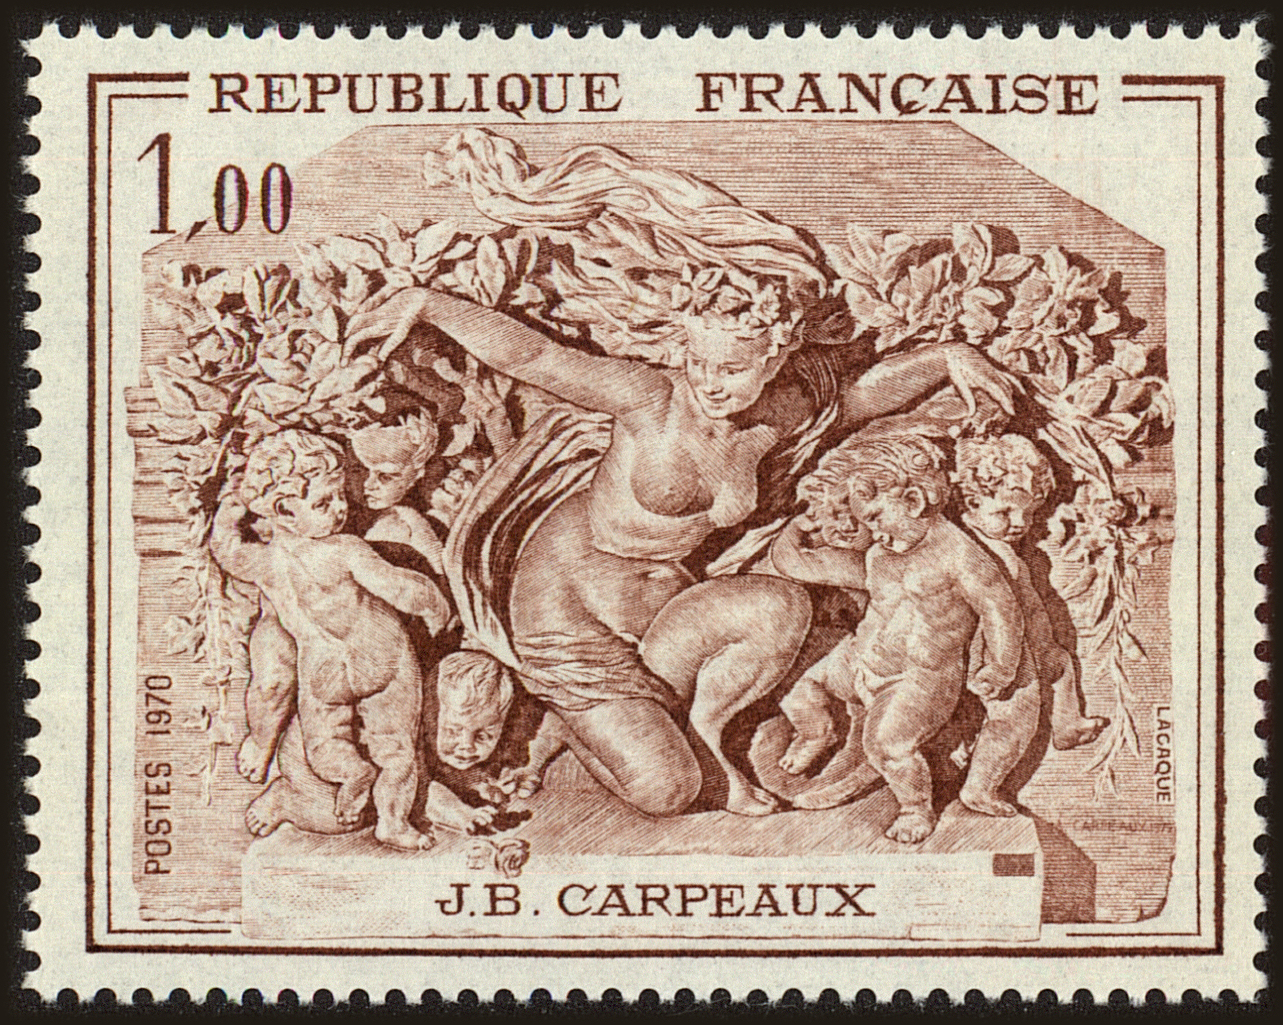 Front view of France 1274 collectors stamp